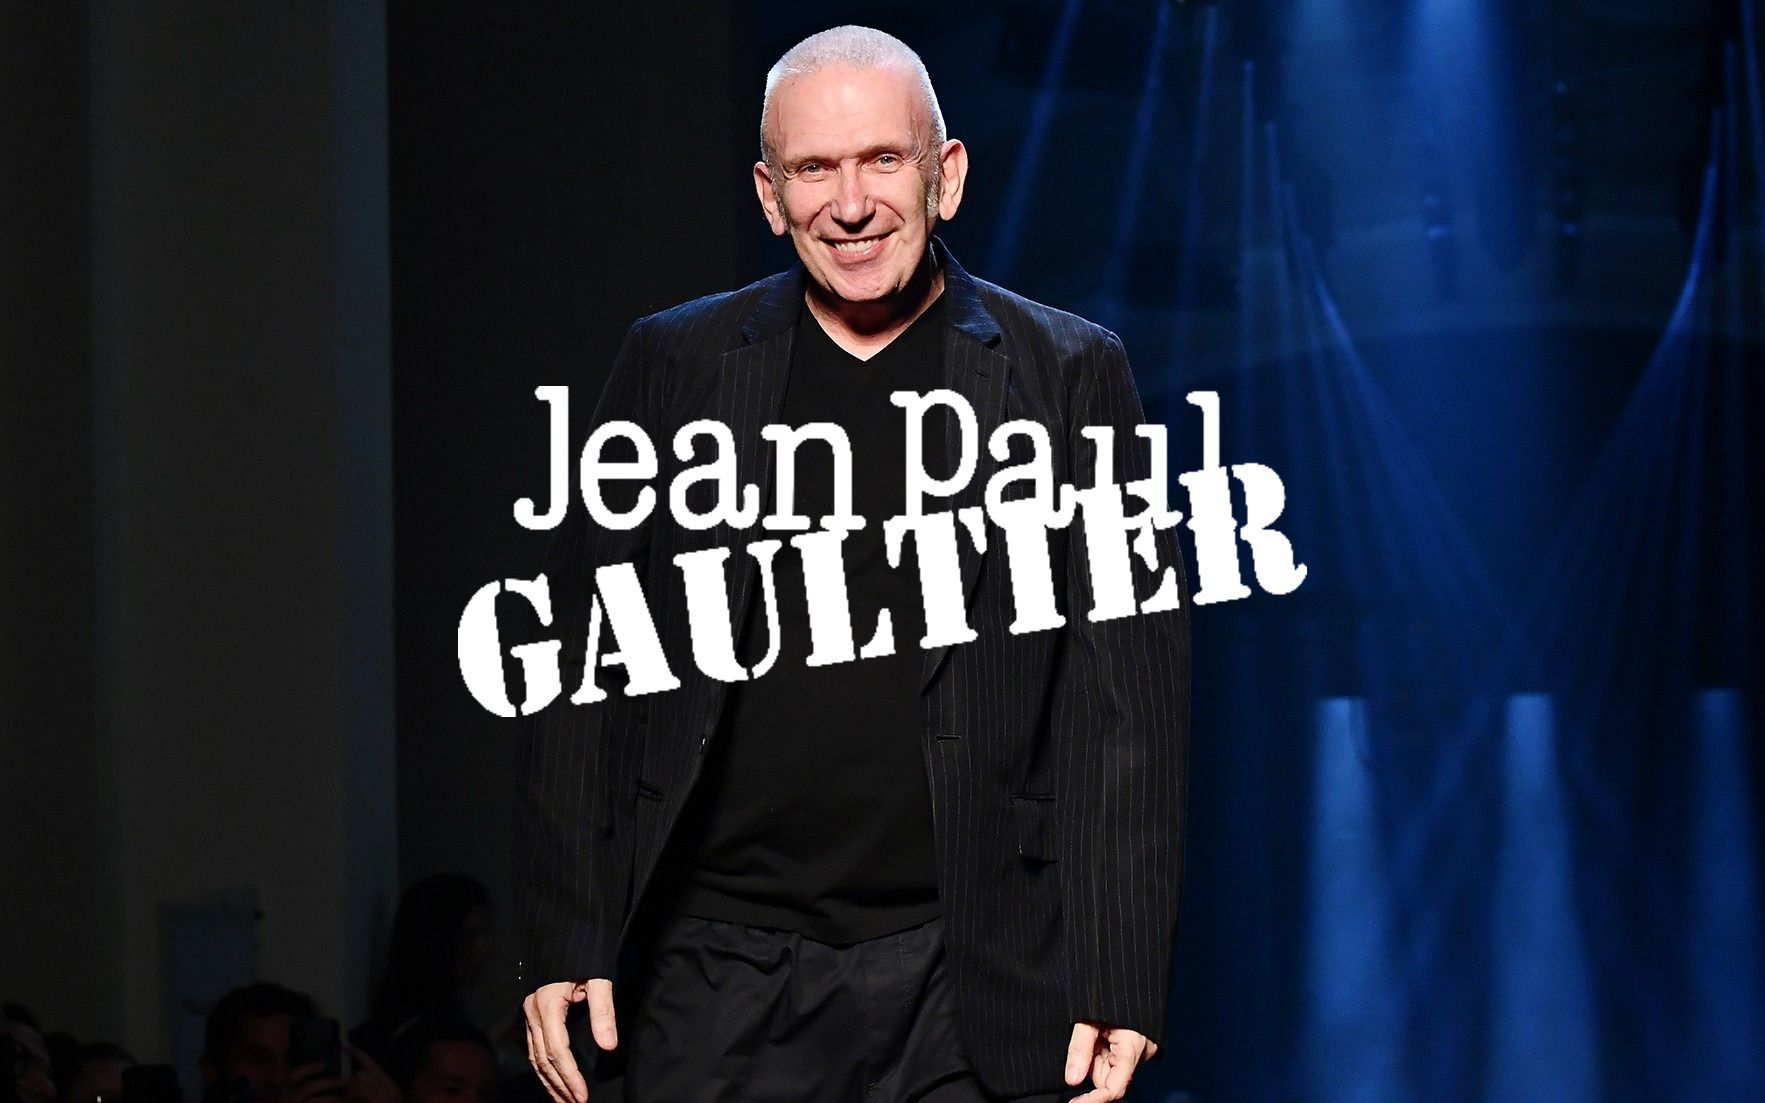 Jean-Paul Gaultier returns to ready-to-wear after 6 years